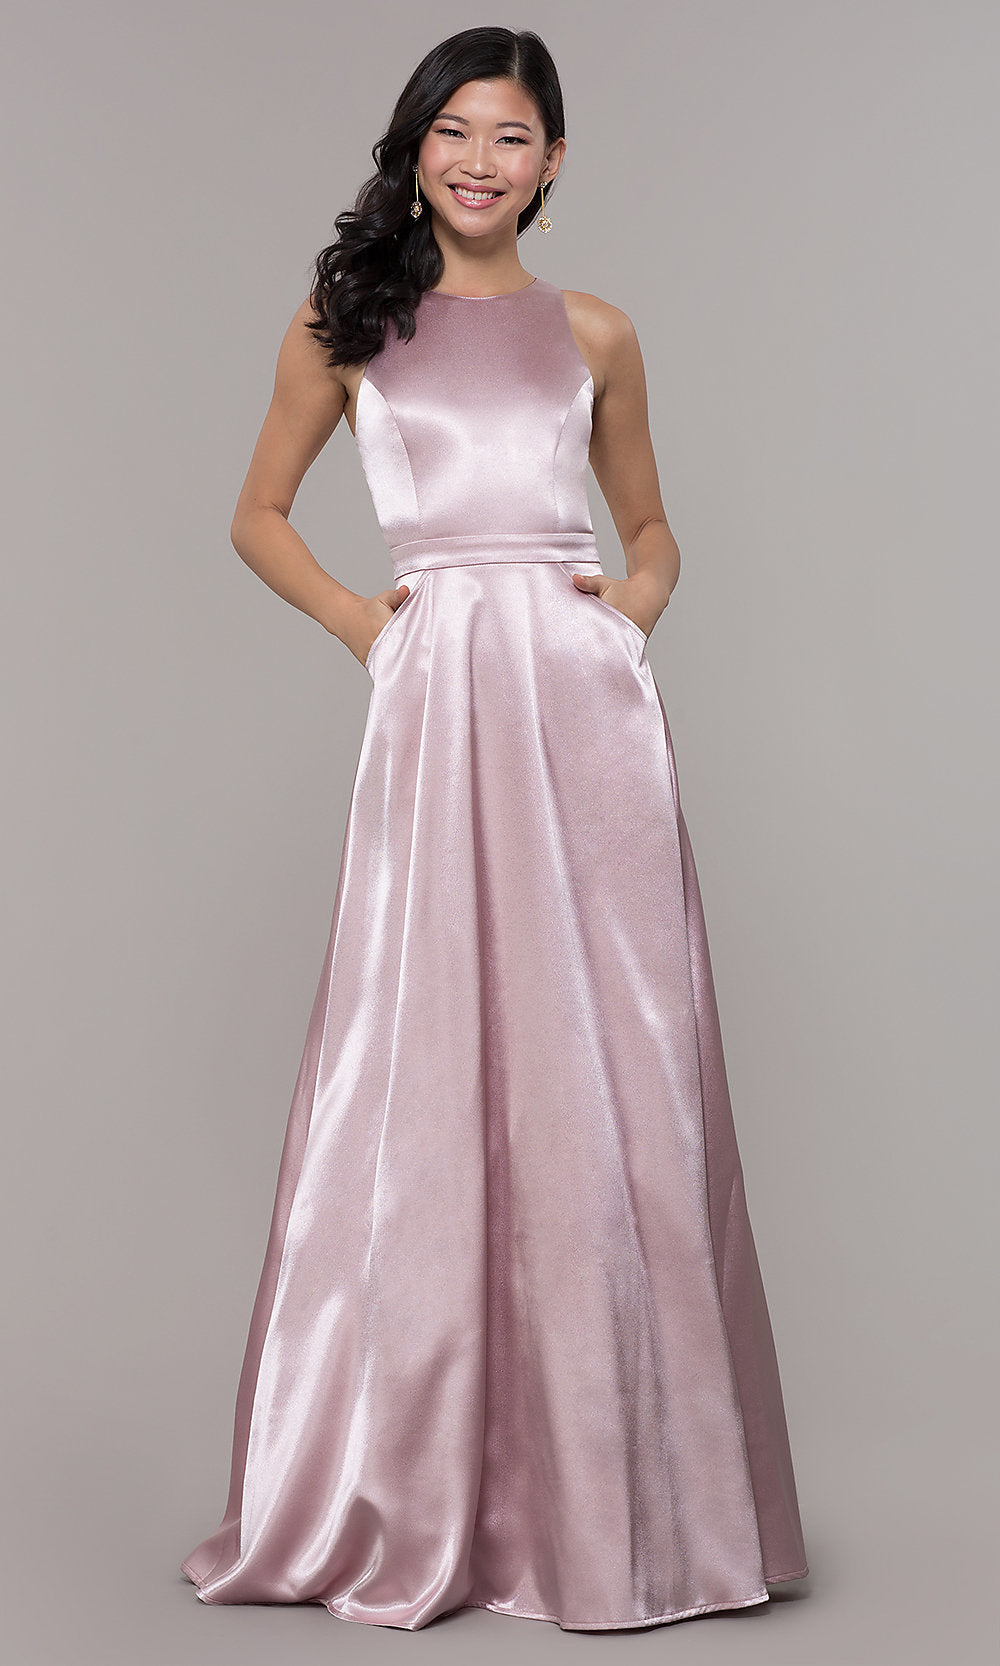  High-Neck Long Satin A-Line Prom Dress with Pockets